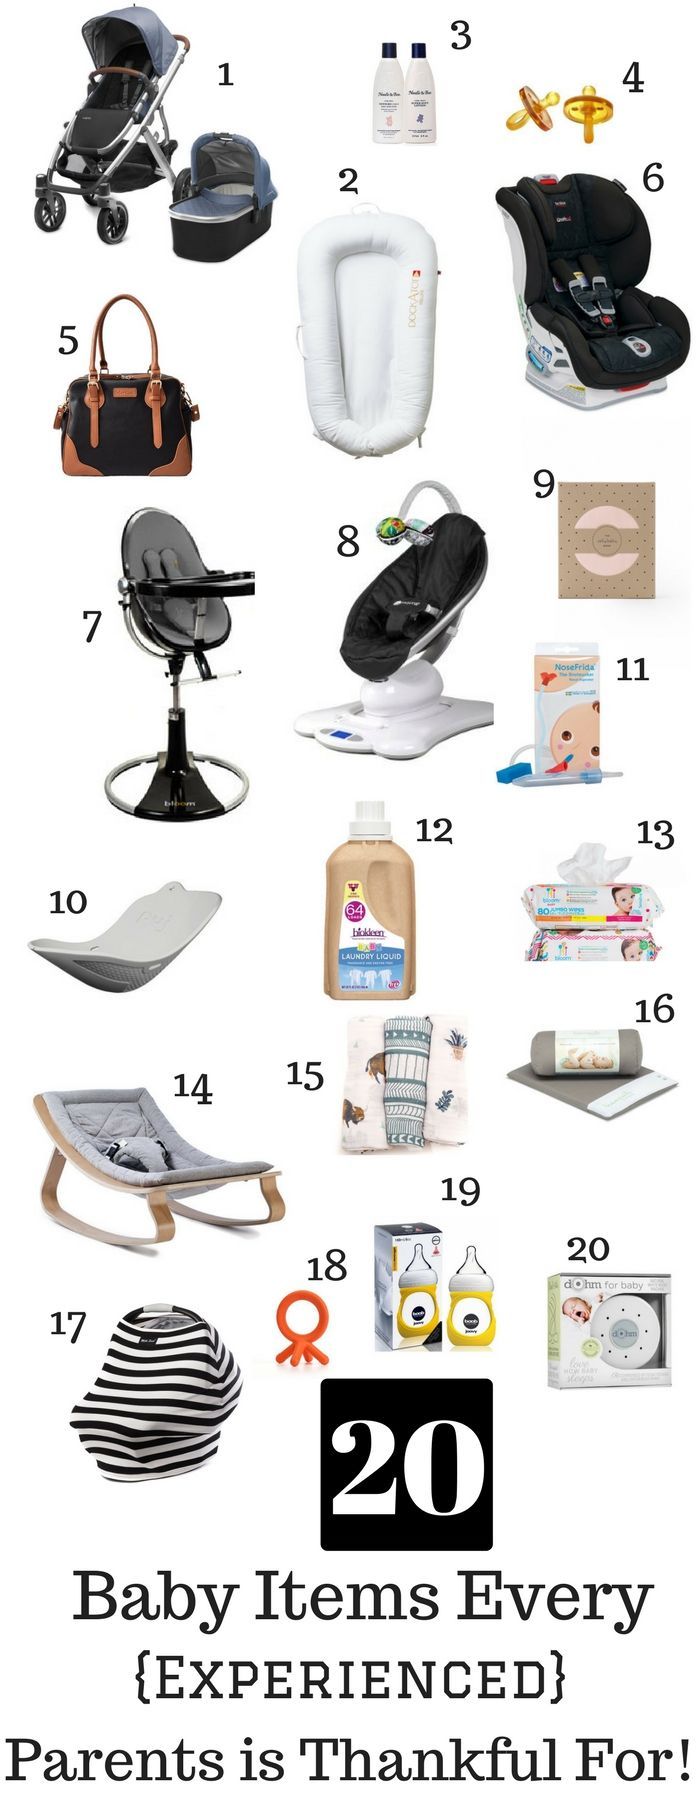 baby products manufacturer